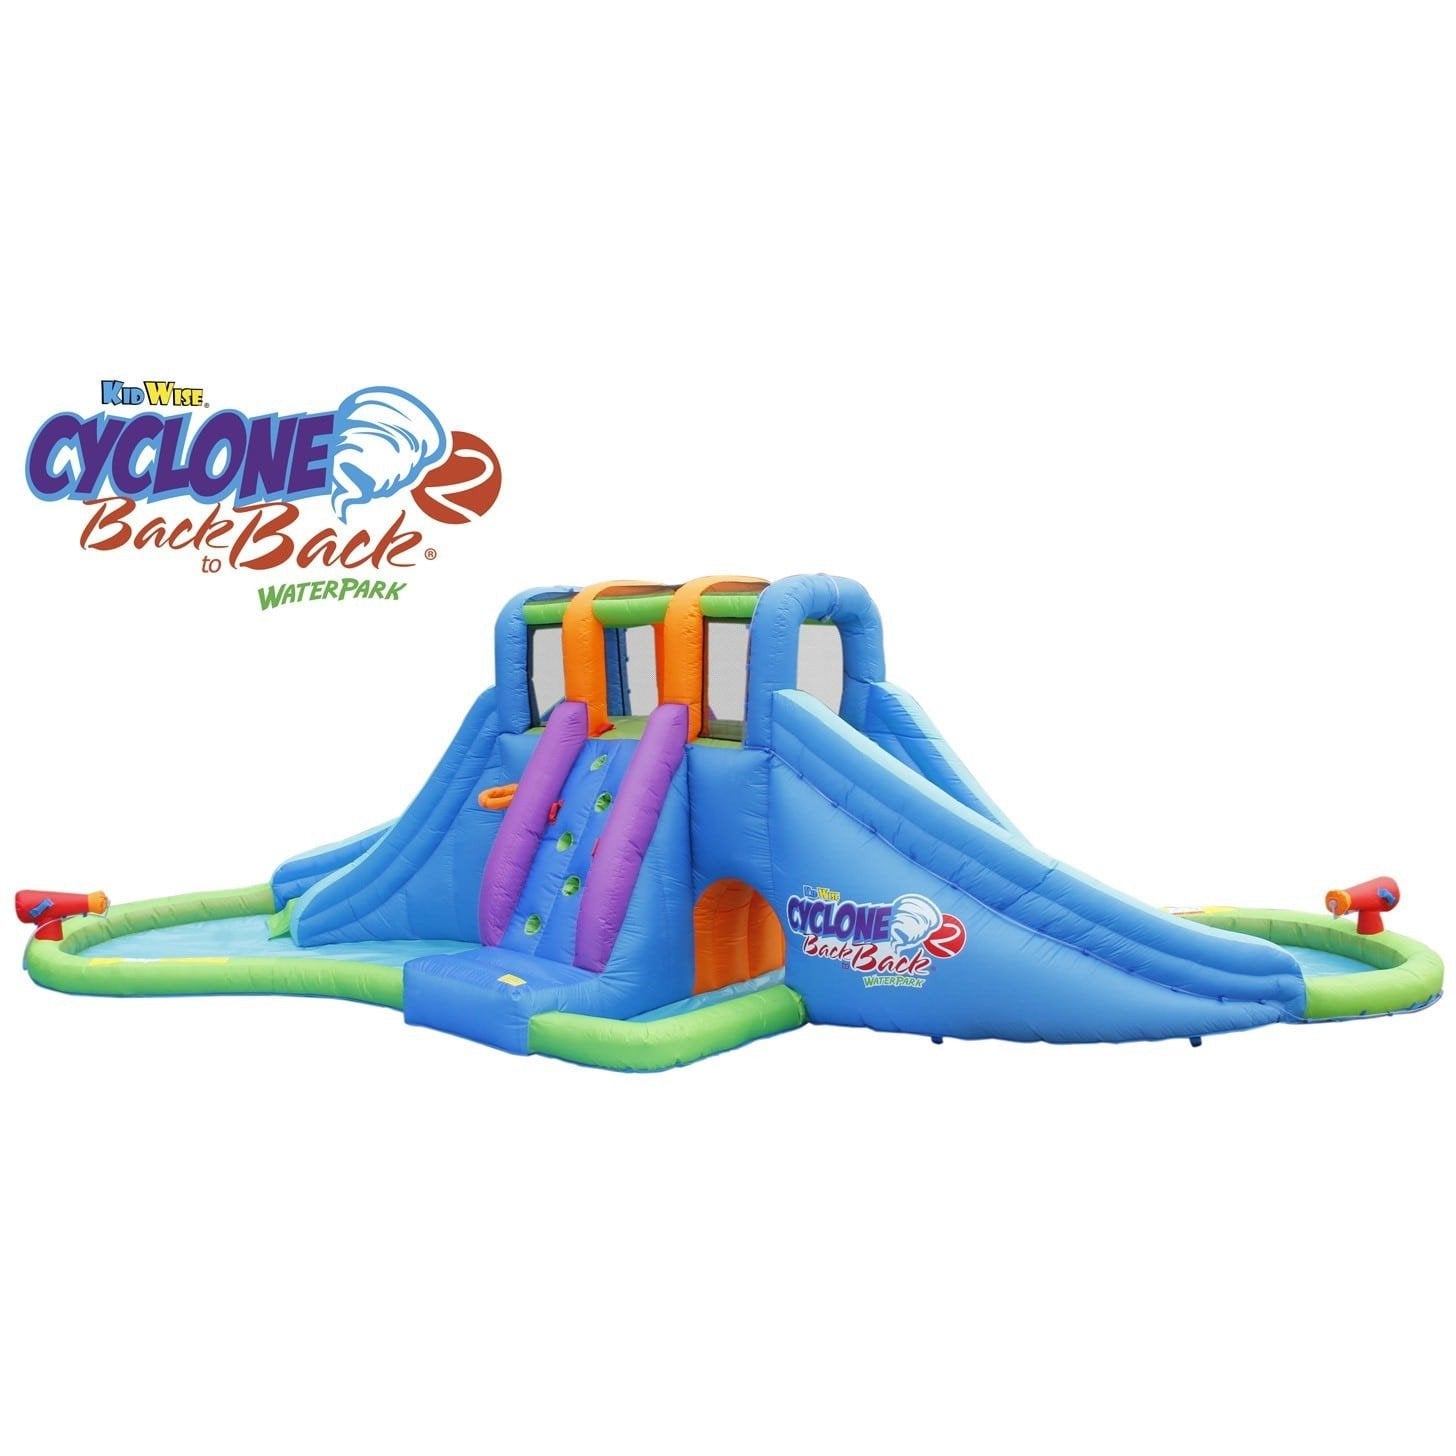 Kidwise Residential Bounce House KidWise Cyclone2 Back to Back® Water Park and Lazy River KWW-CYC-V2